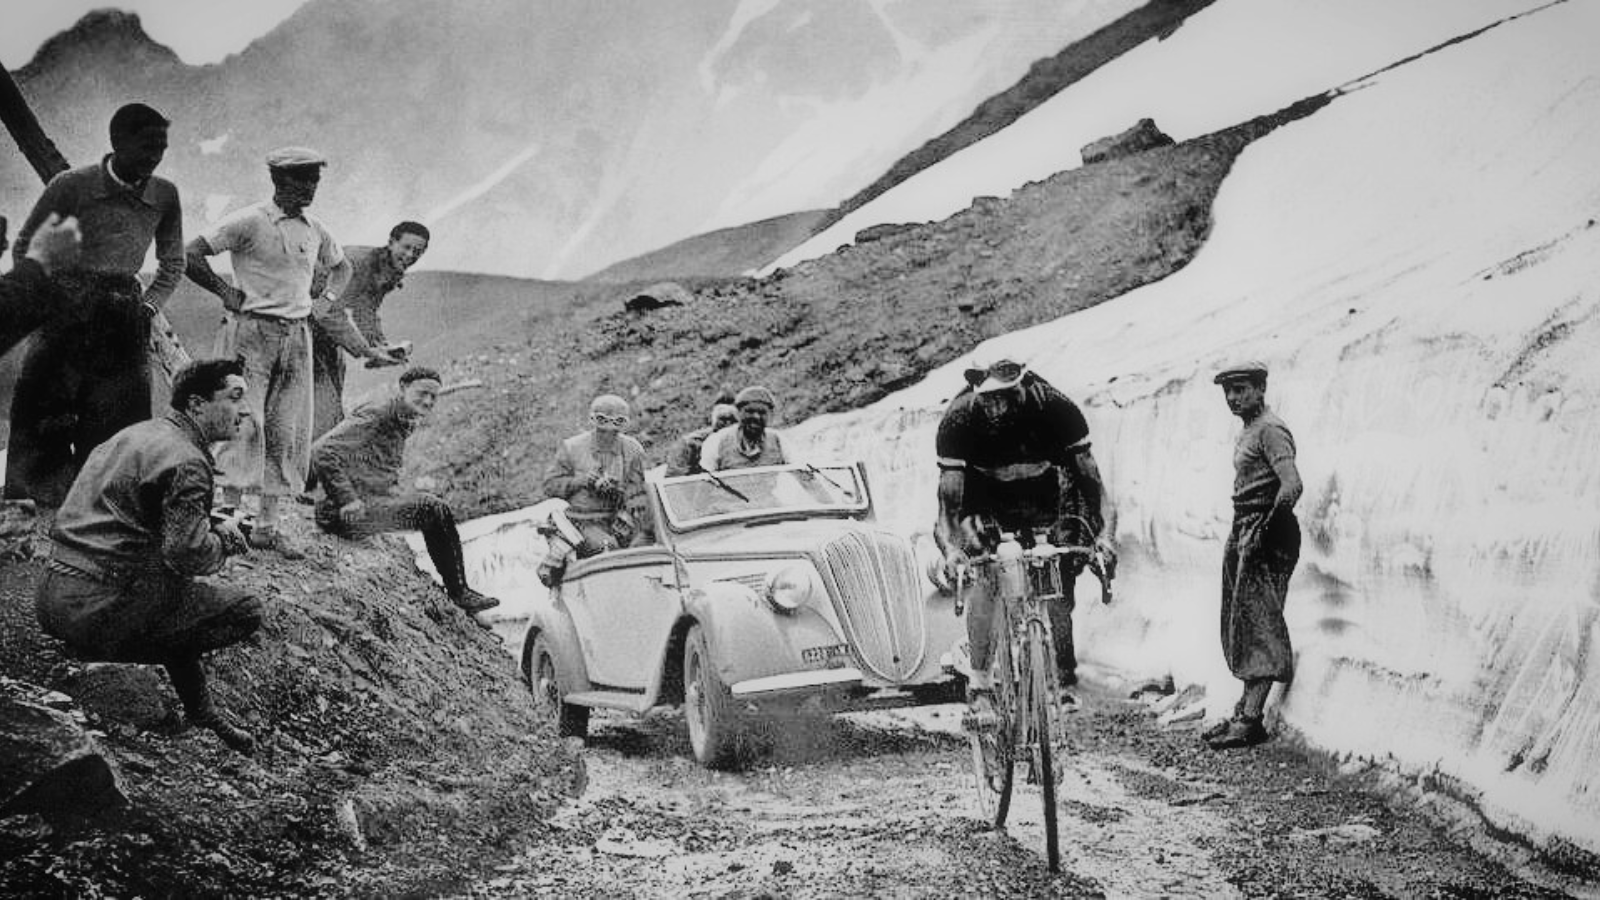 Italian two-time Tour de France winner and one of the greatest legends Gino Bartali climbing the Alps at Tour de France 1937